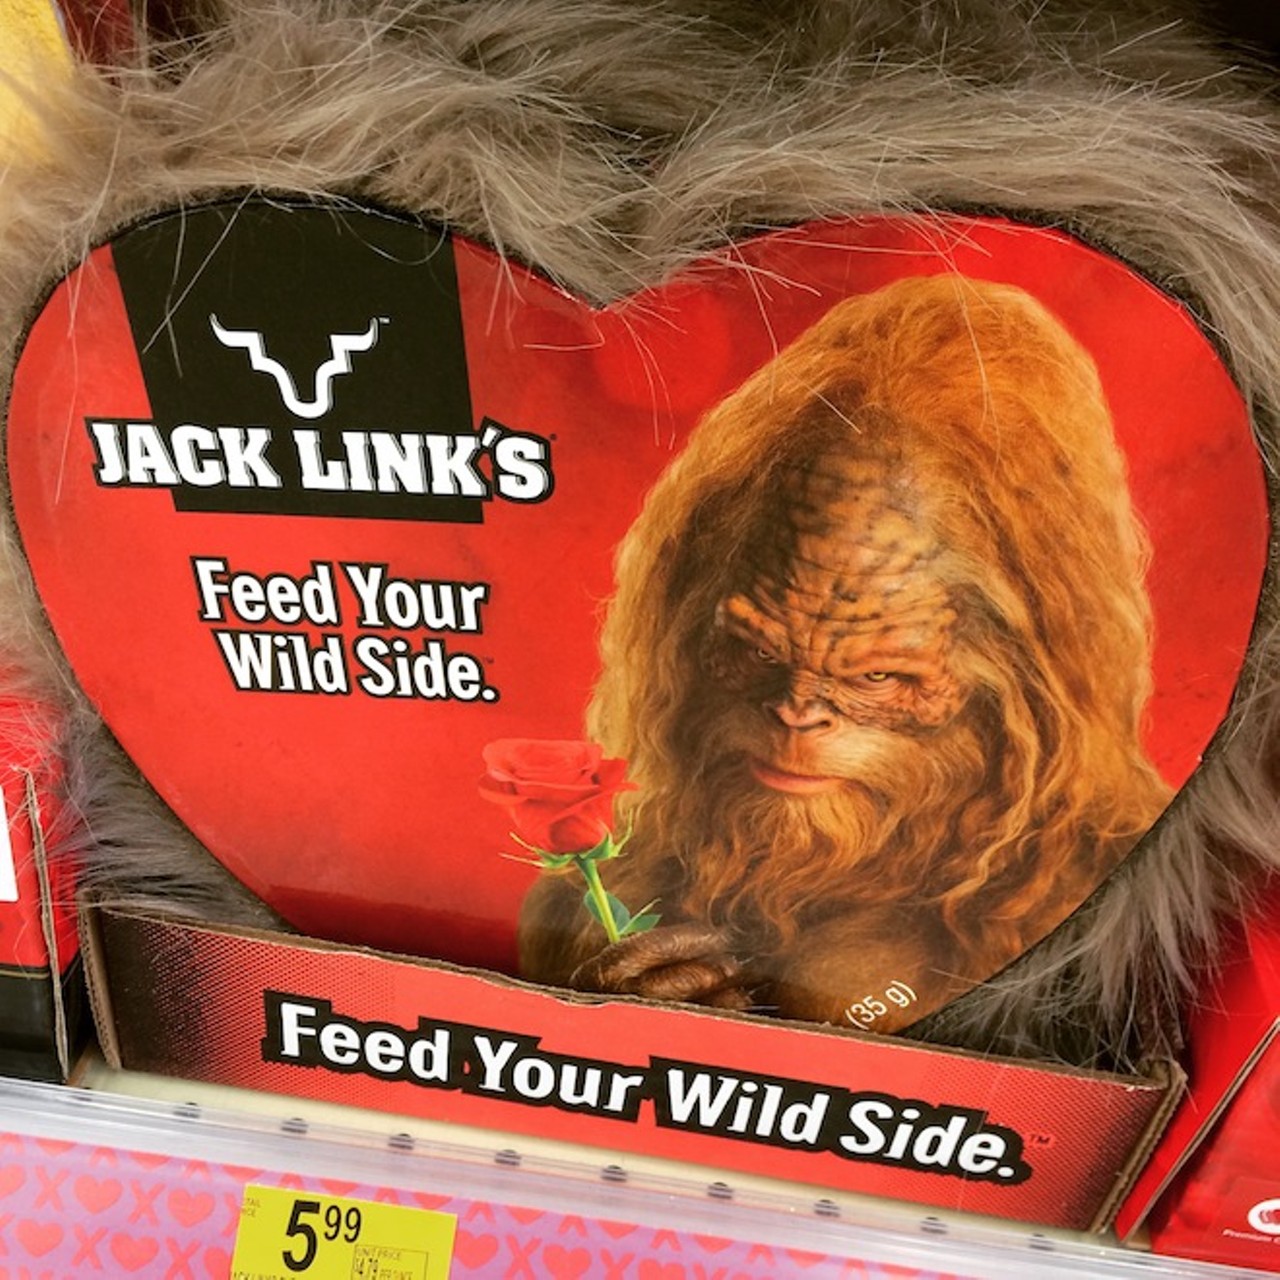 Getting ready for Valentine's Day with some quality snacks